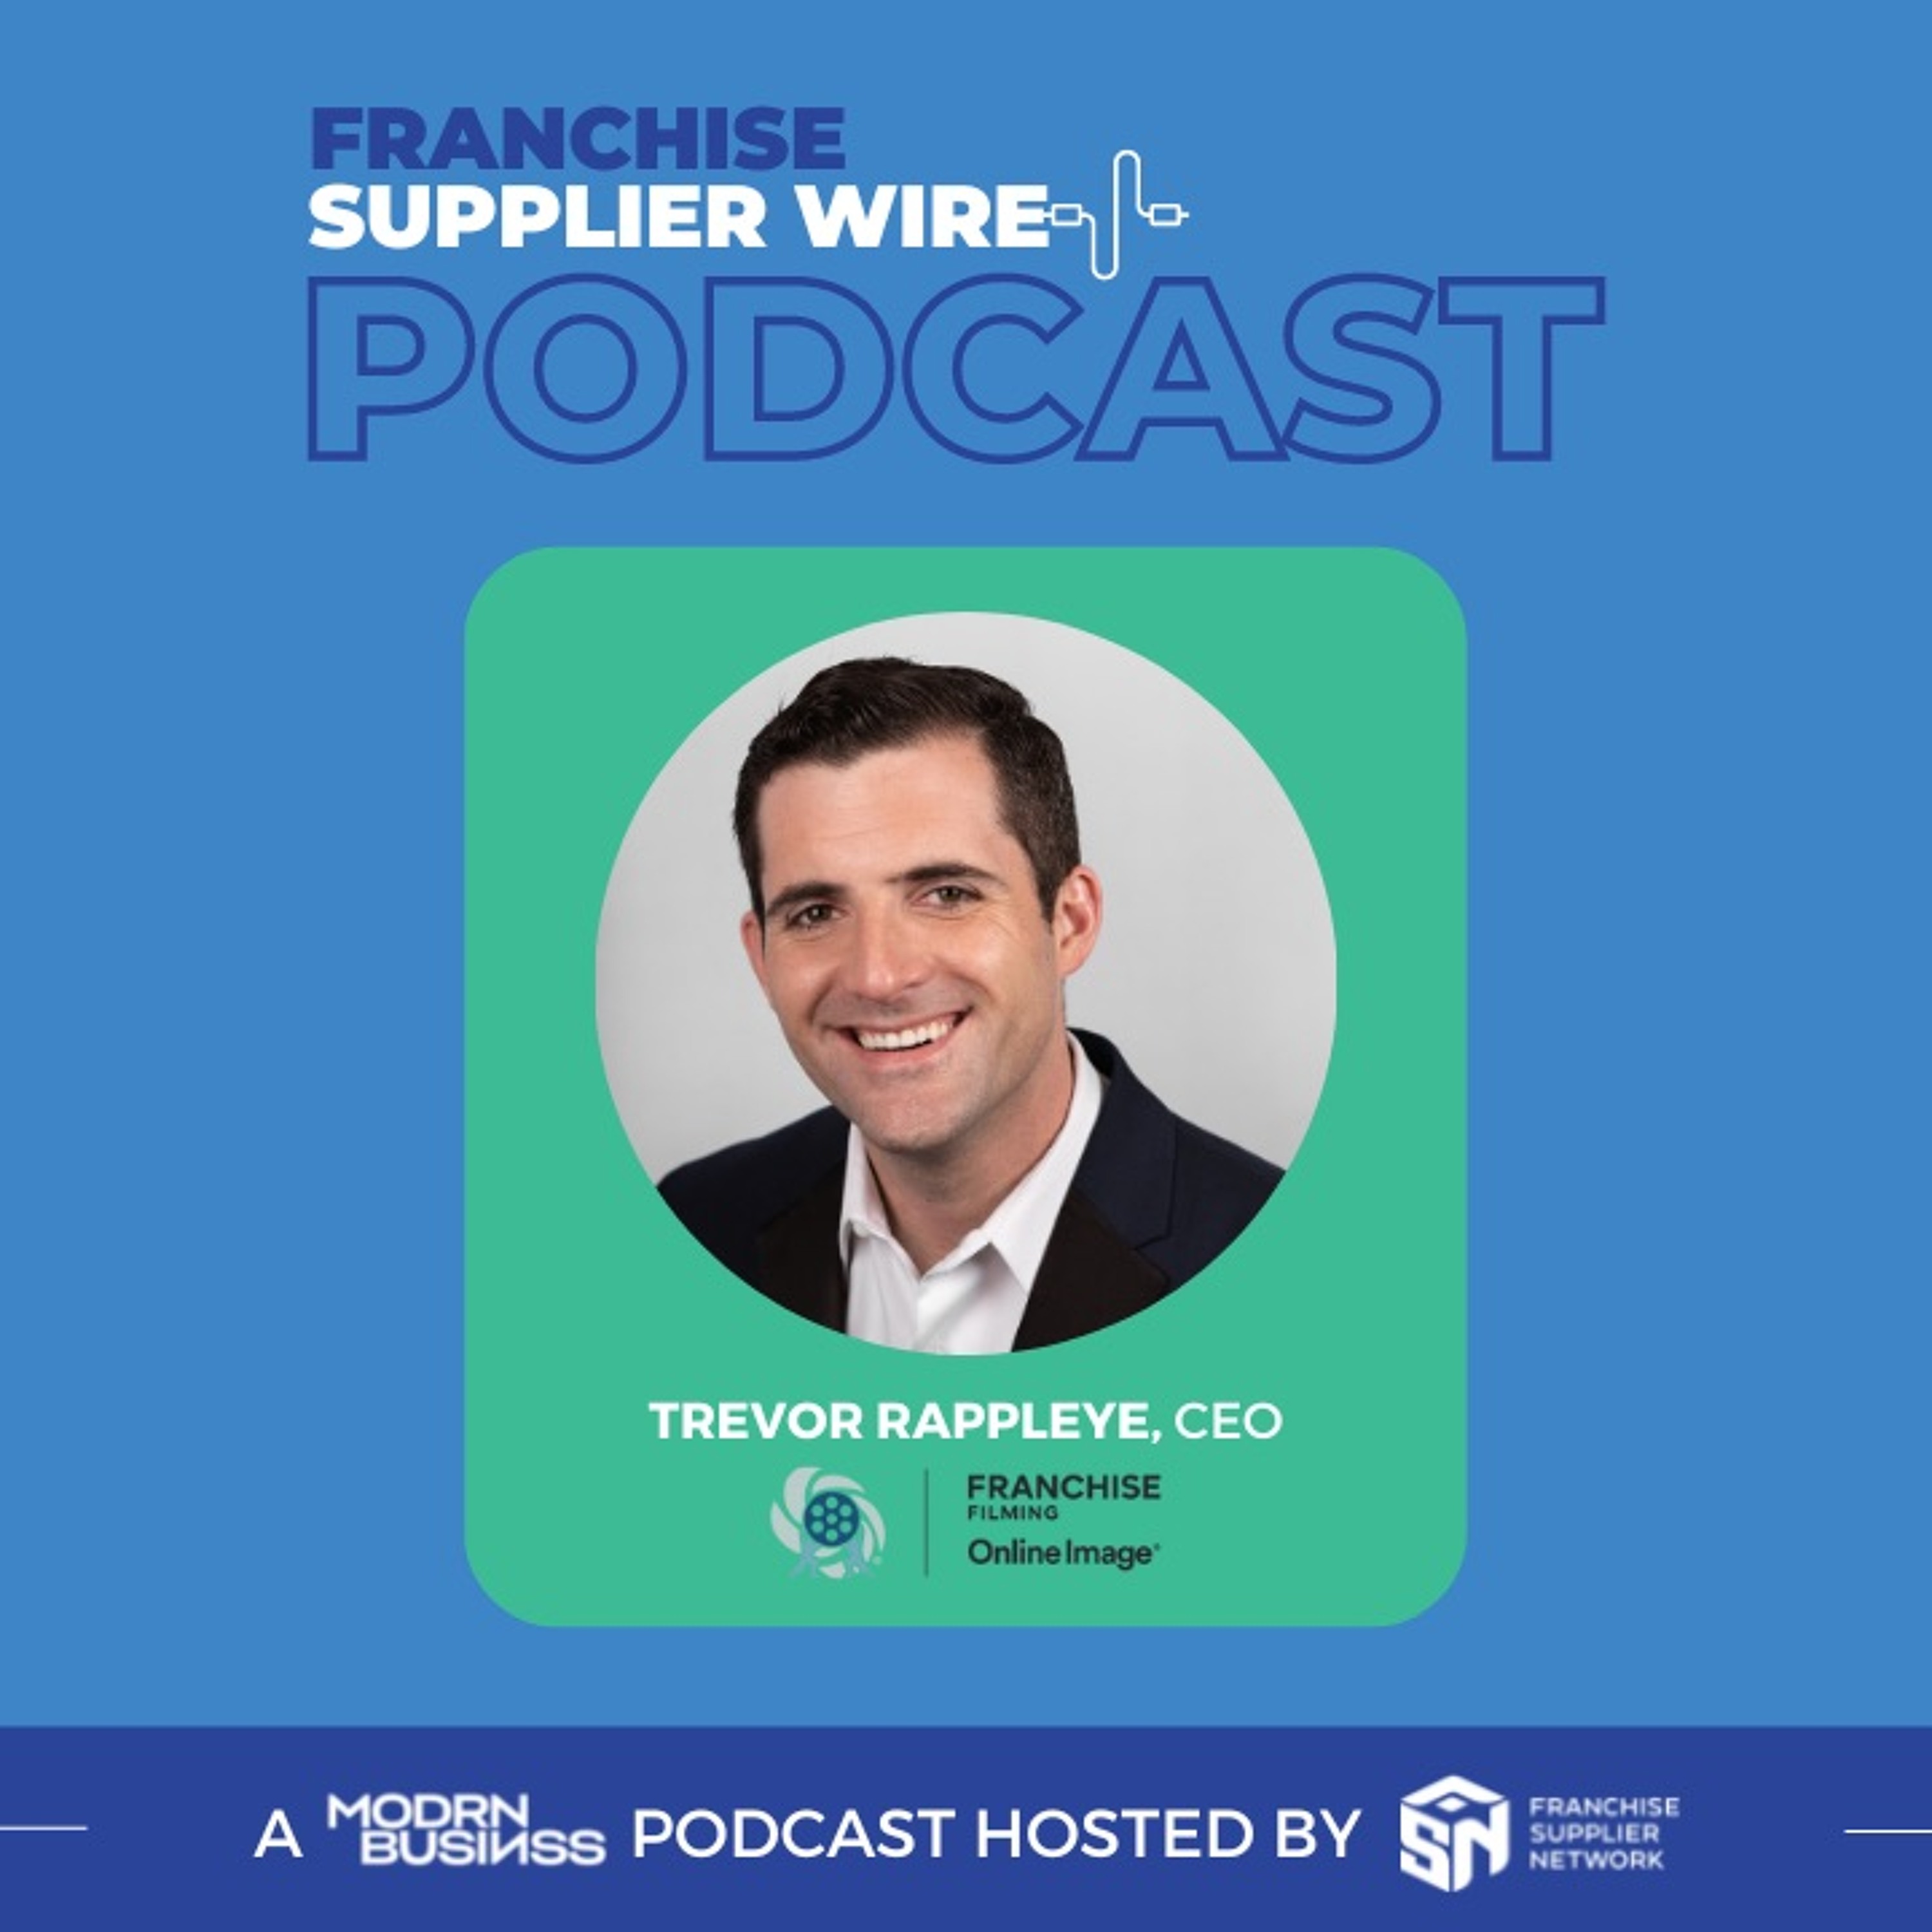 Supplier Wire 007: How Franchisors Can Leverage Storytelling, Franchise Filming CEO Trevor Rappleye